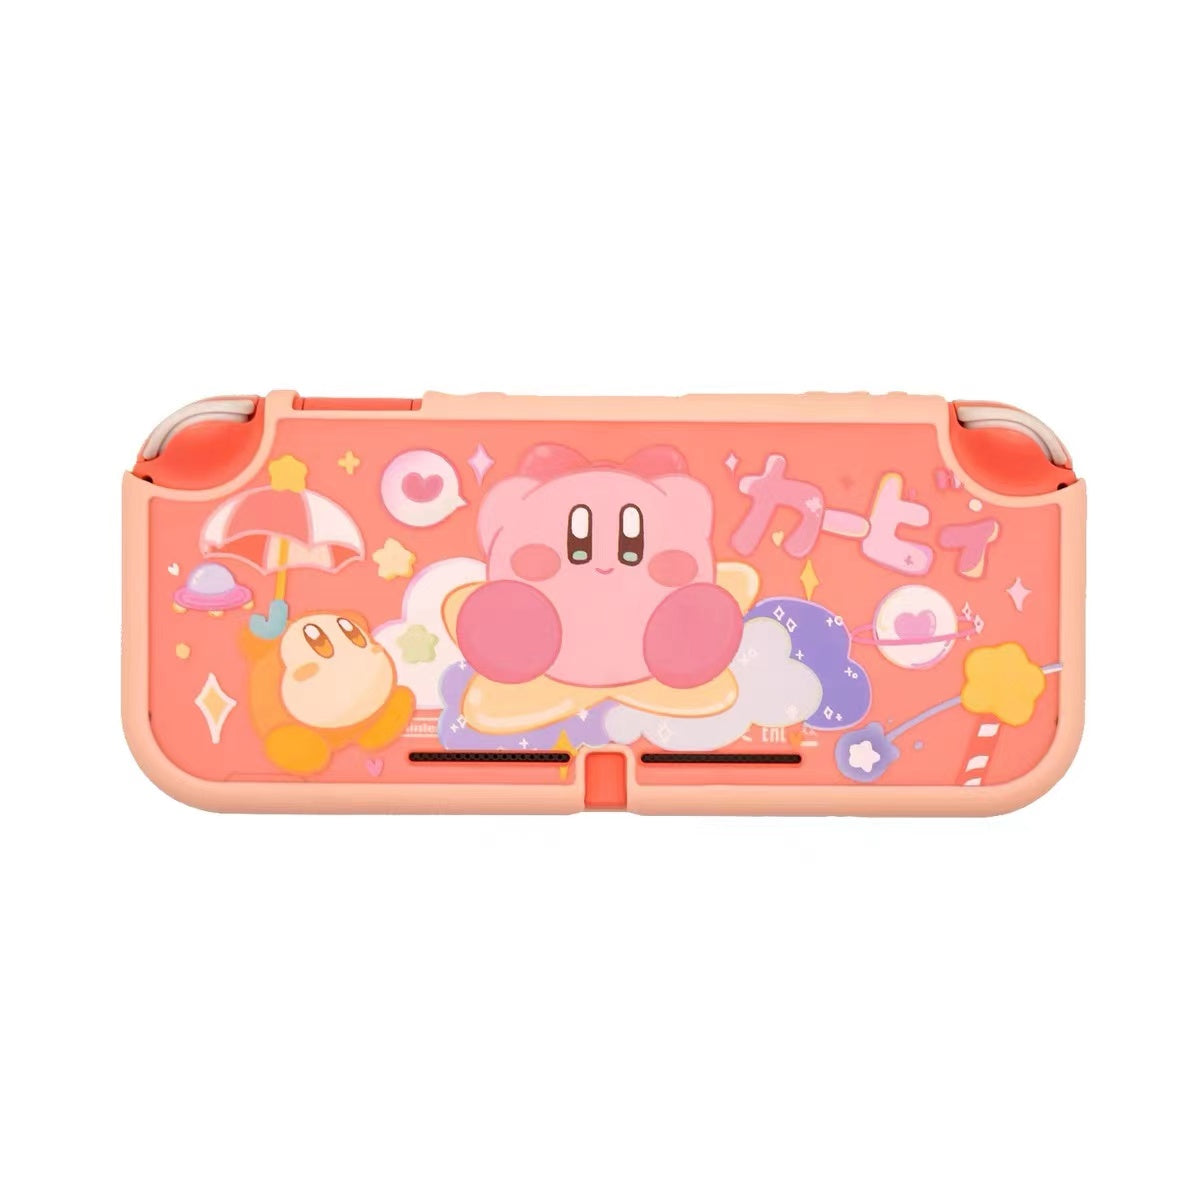 BlingKiyo Kirby Protective Case For Switch Lite